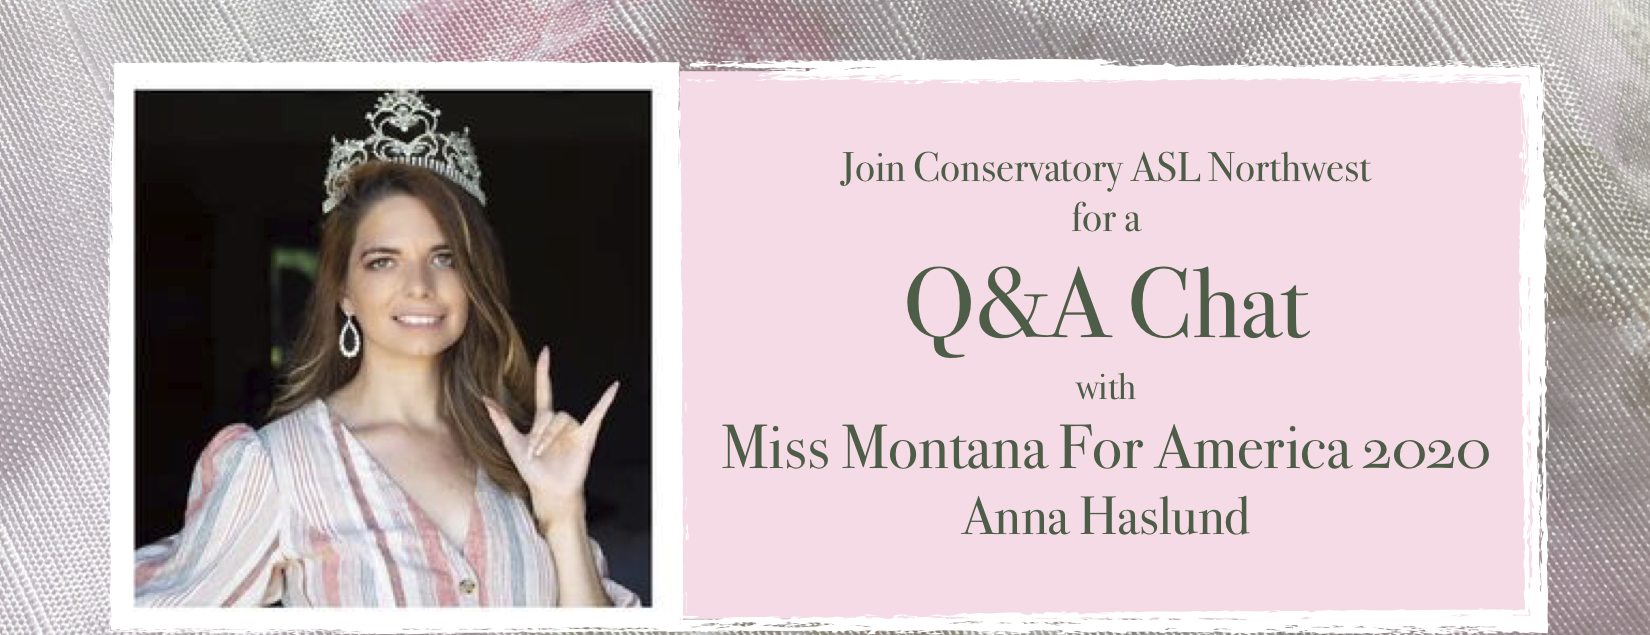 Q&A Chat with Miss Montana for America 2020 @ Zoom